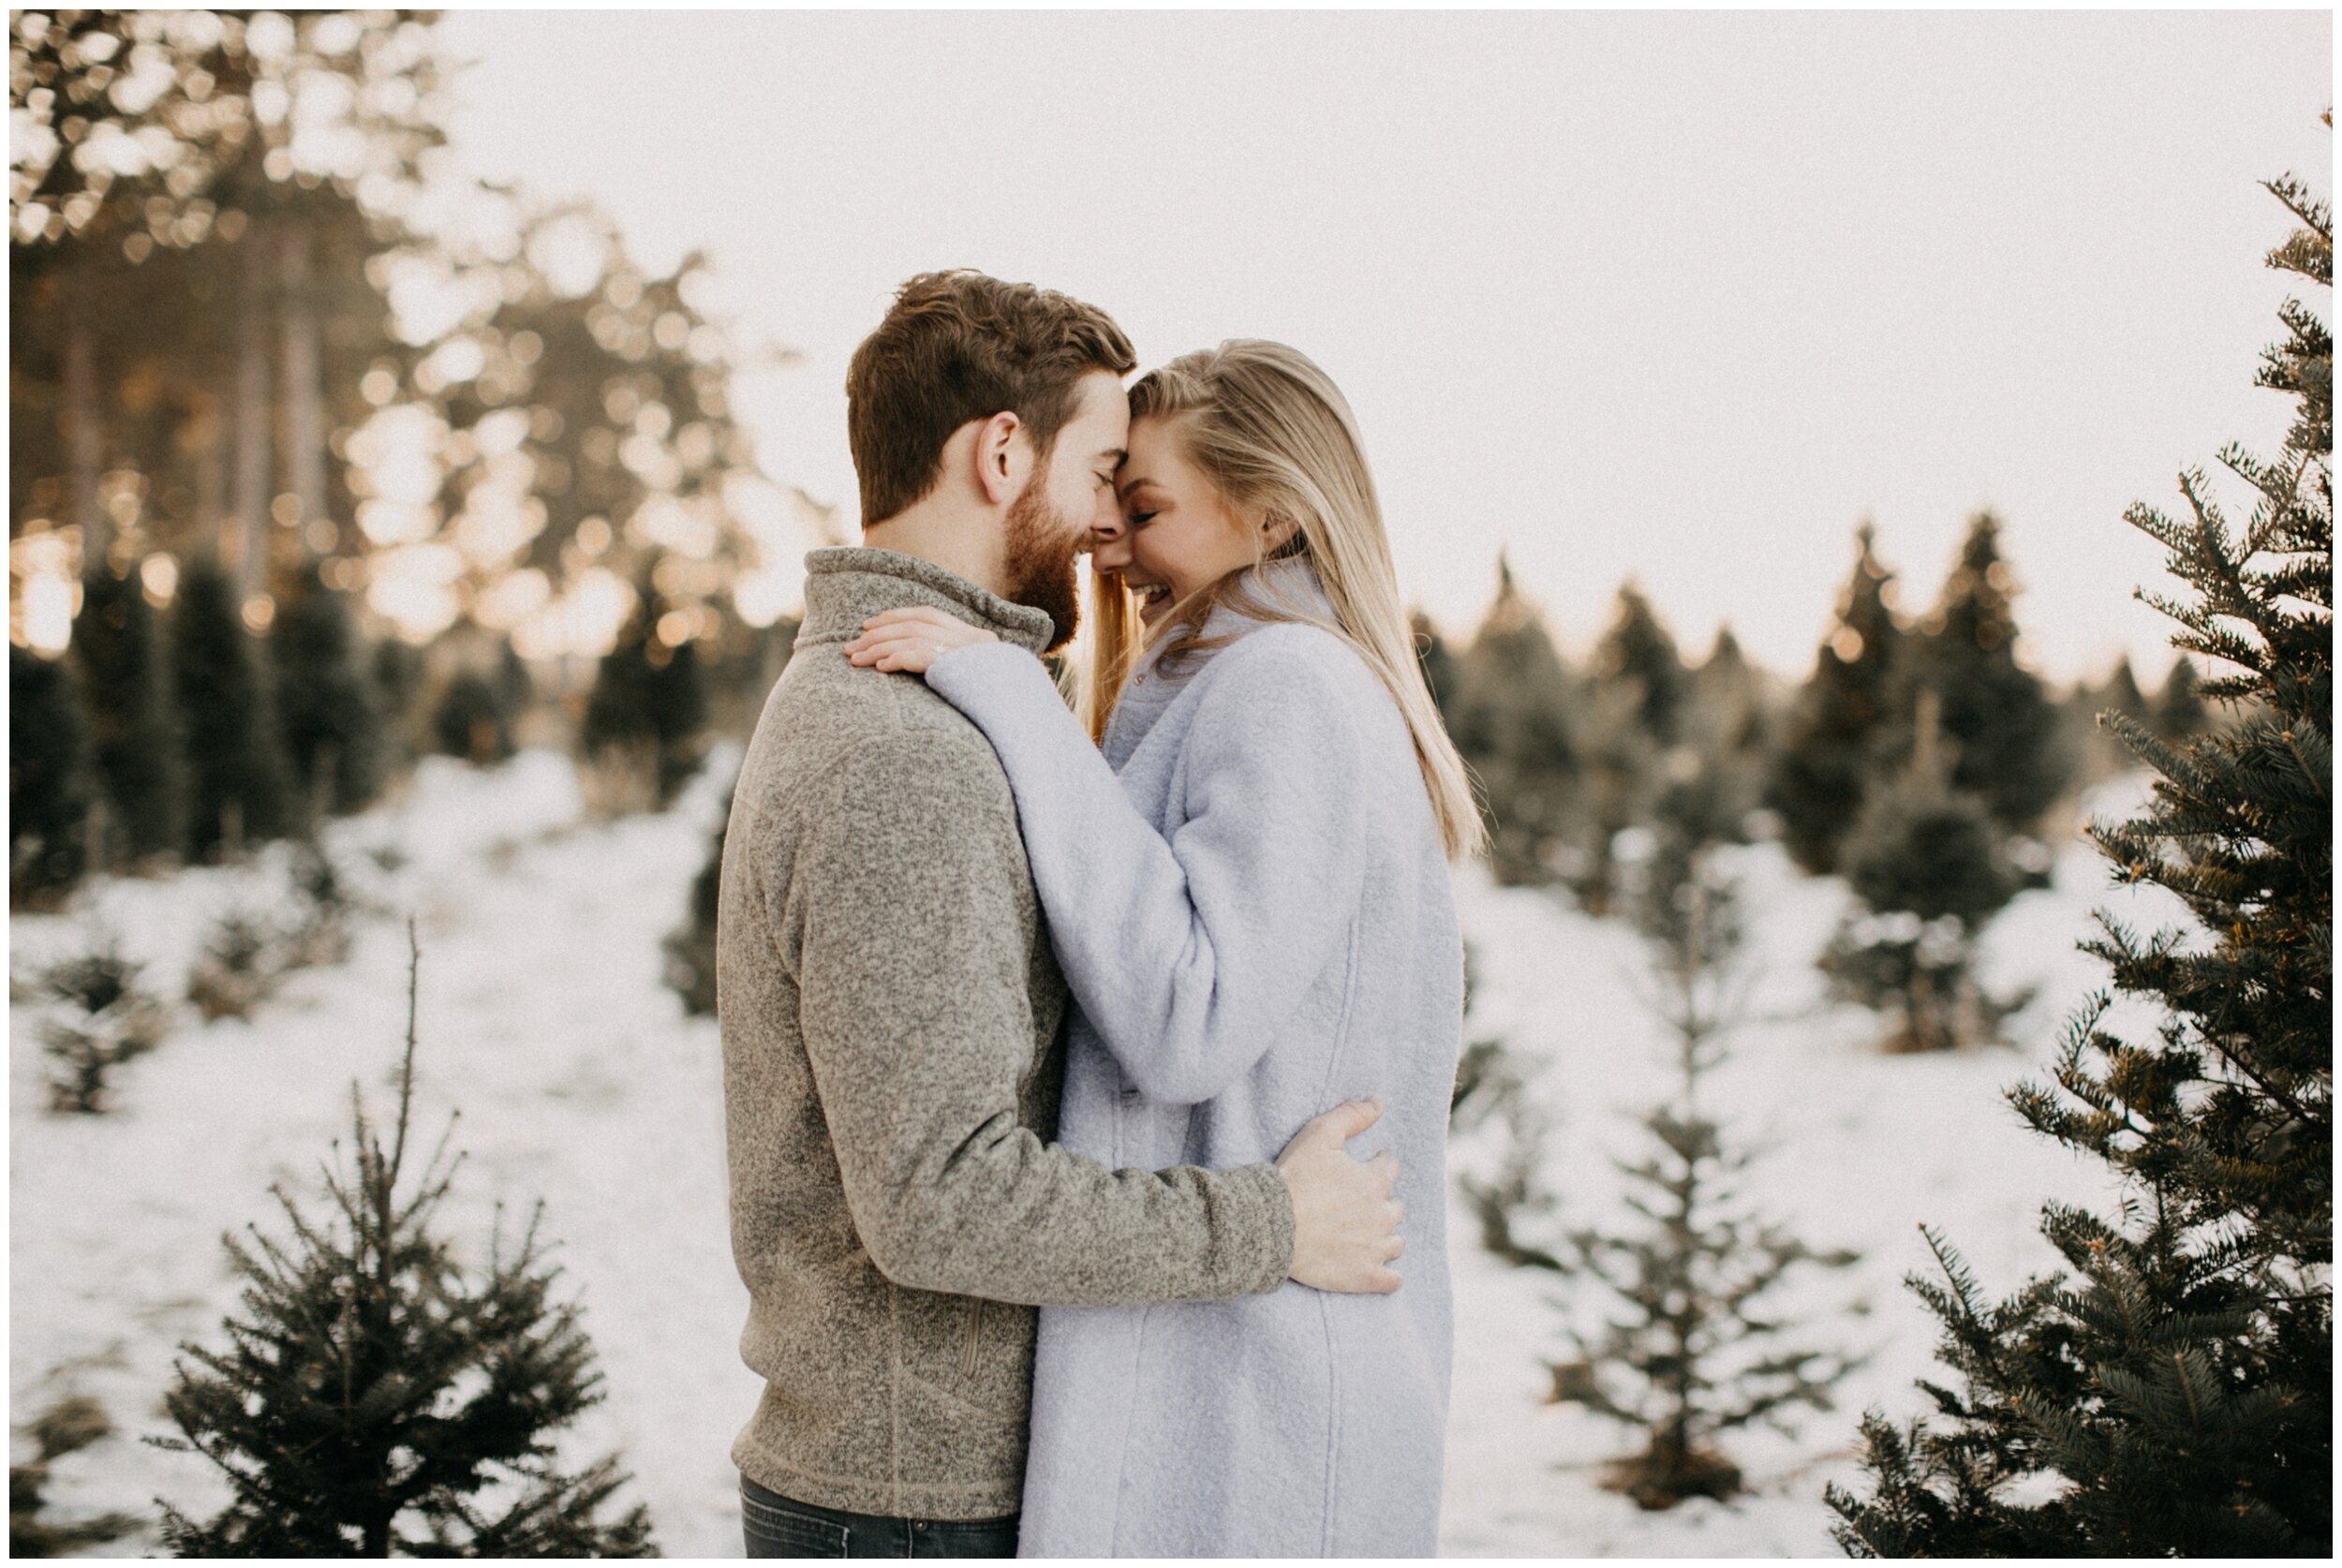 Engaged couple laughing while standing in snowy Minnesota Christmas tree farm during sunset